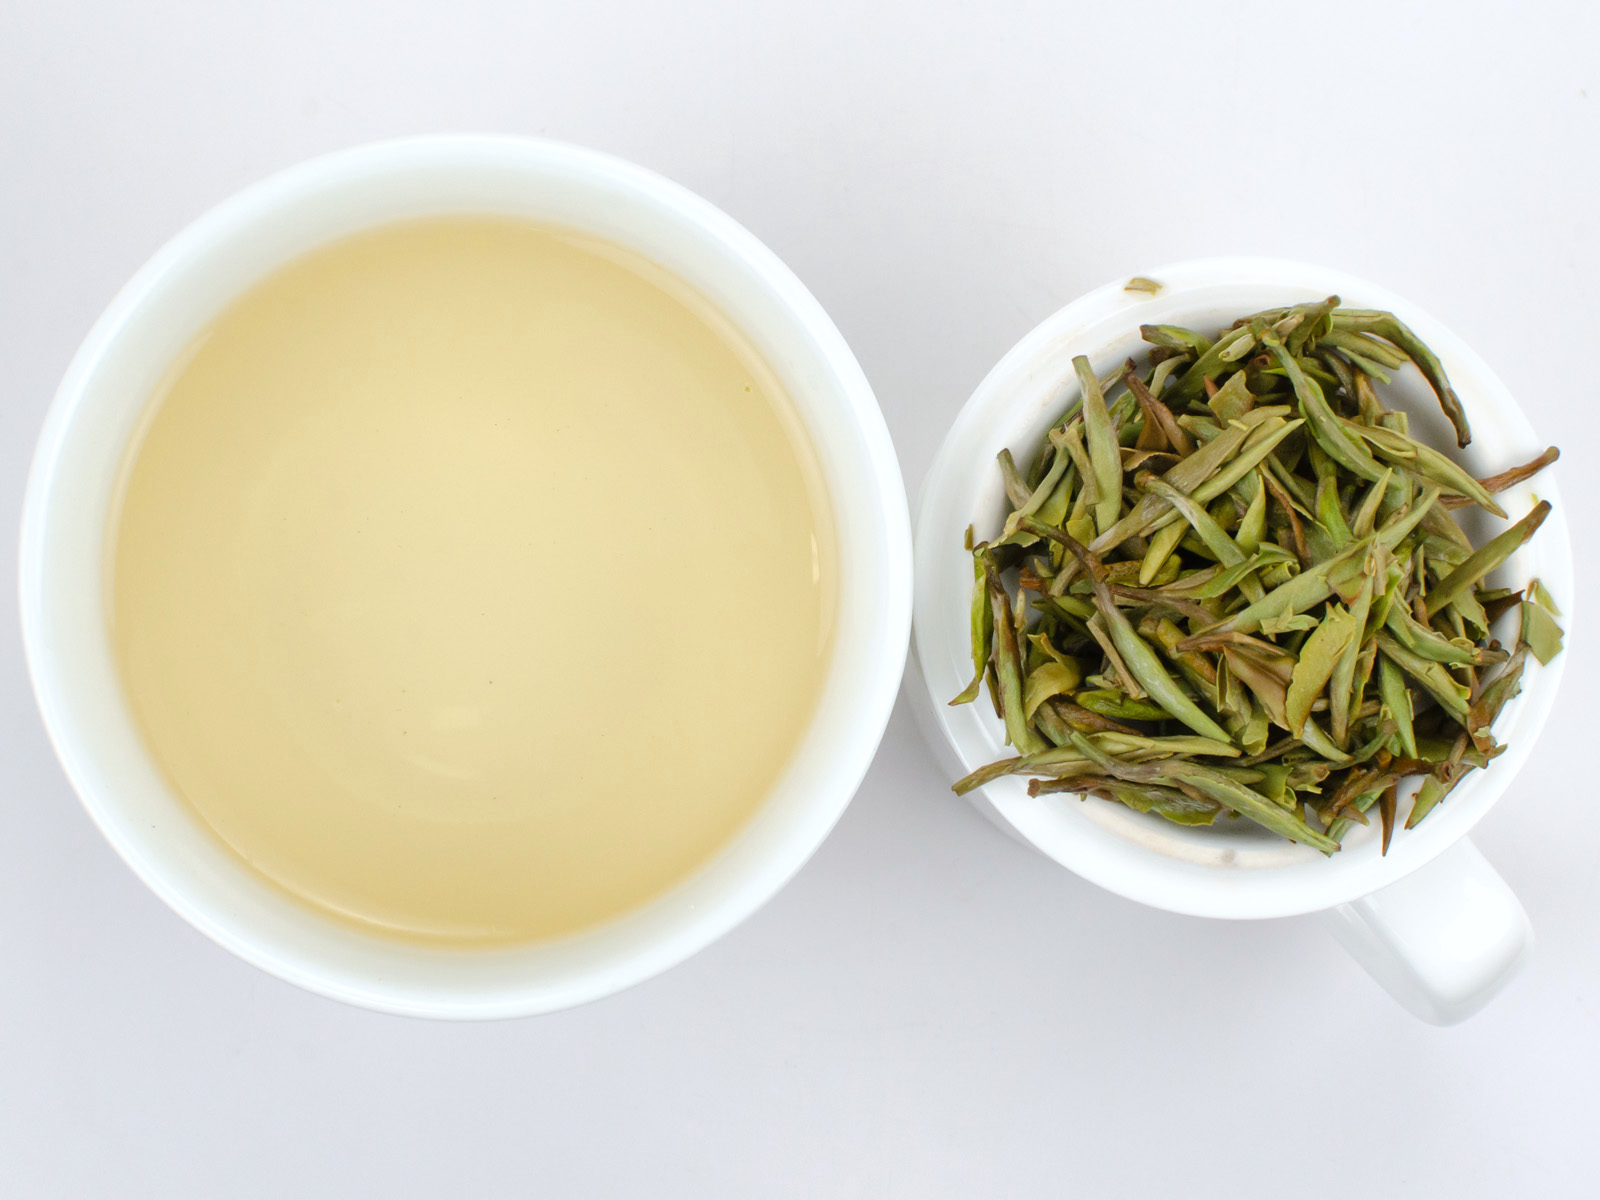 Cupped infusion of Baihao Yinzhen tea and strained leaves.